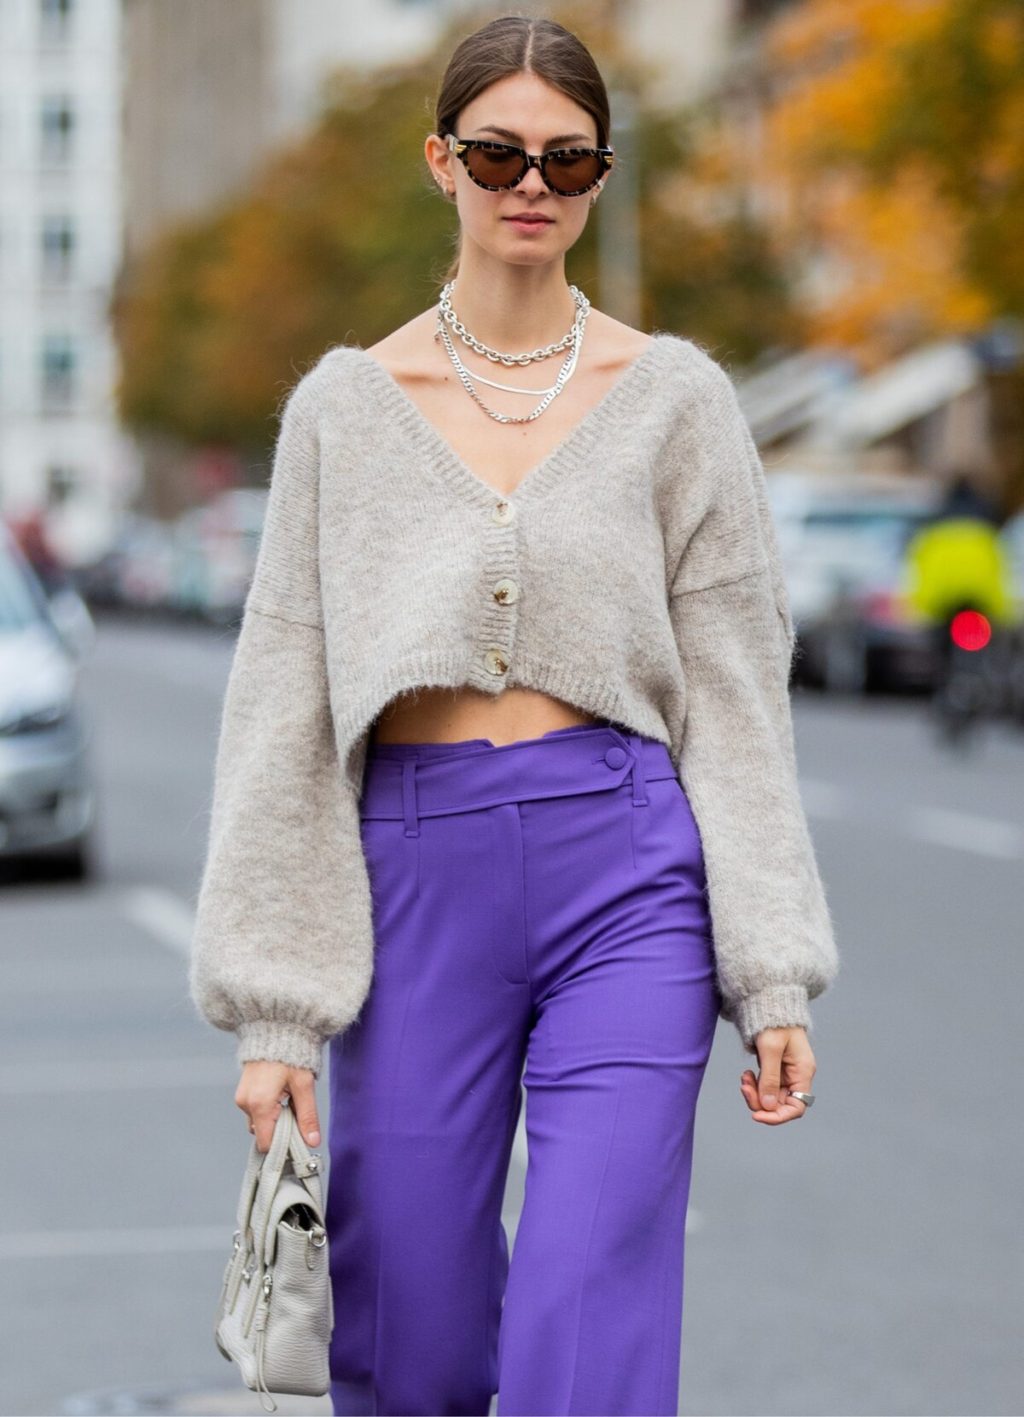 Cropped-Cardigans-1024x1417 60+ Most Fashionable '90s Outfit Ideas For Ladies That Are Coming Back in 2022